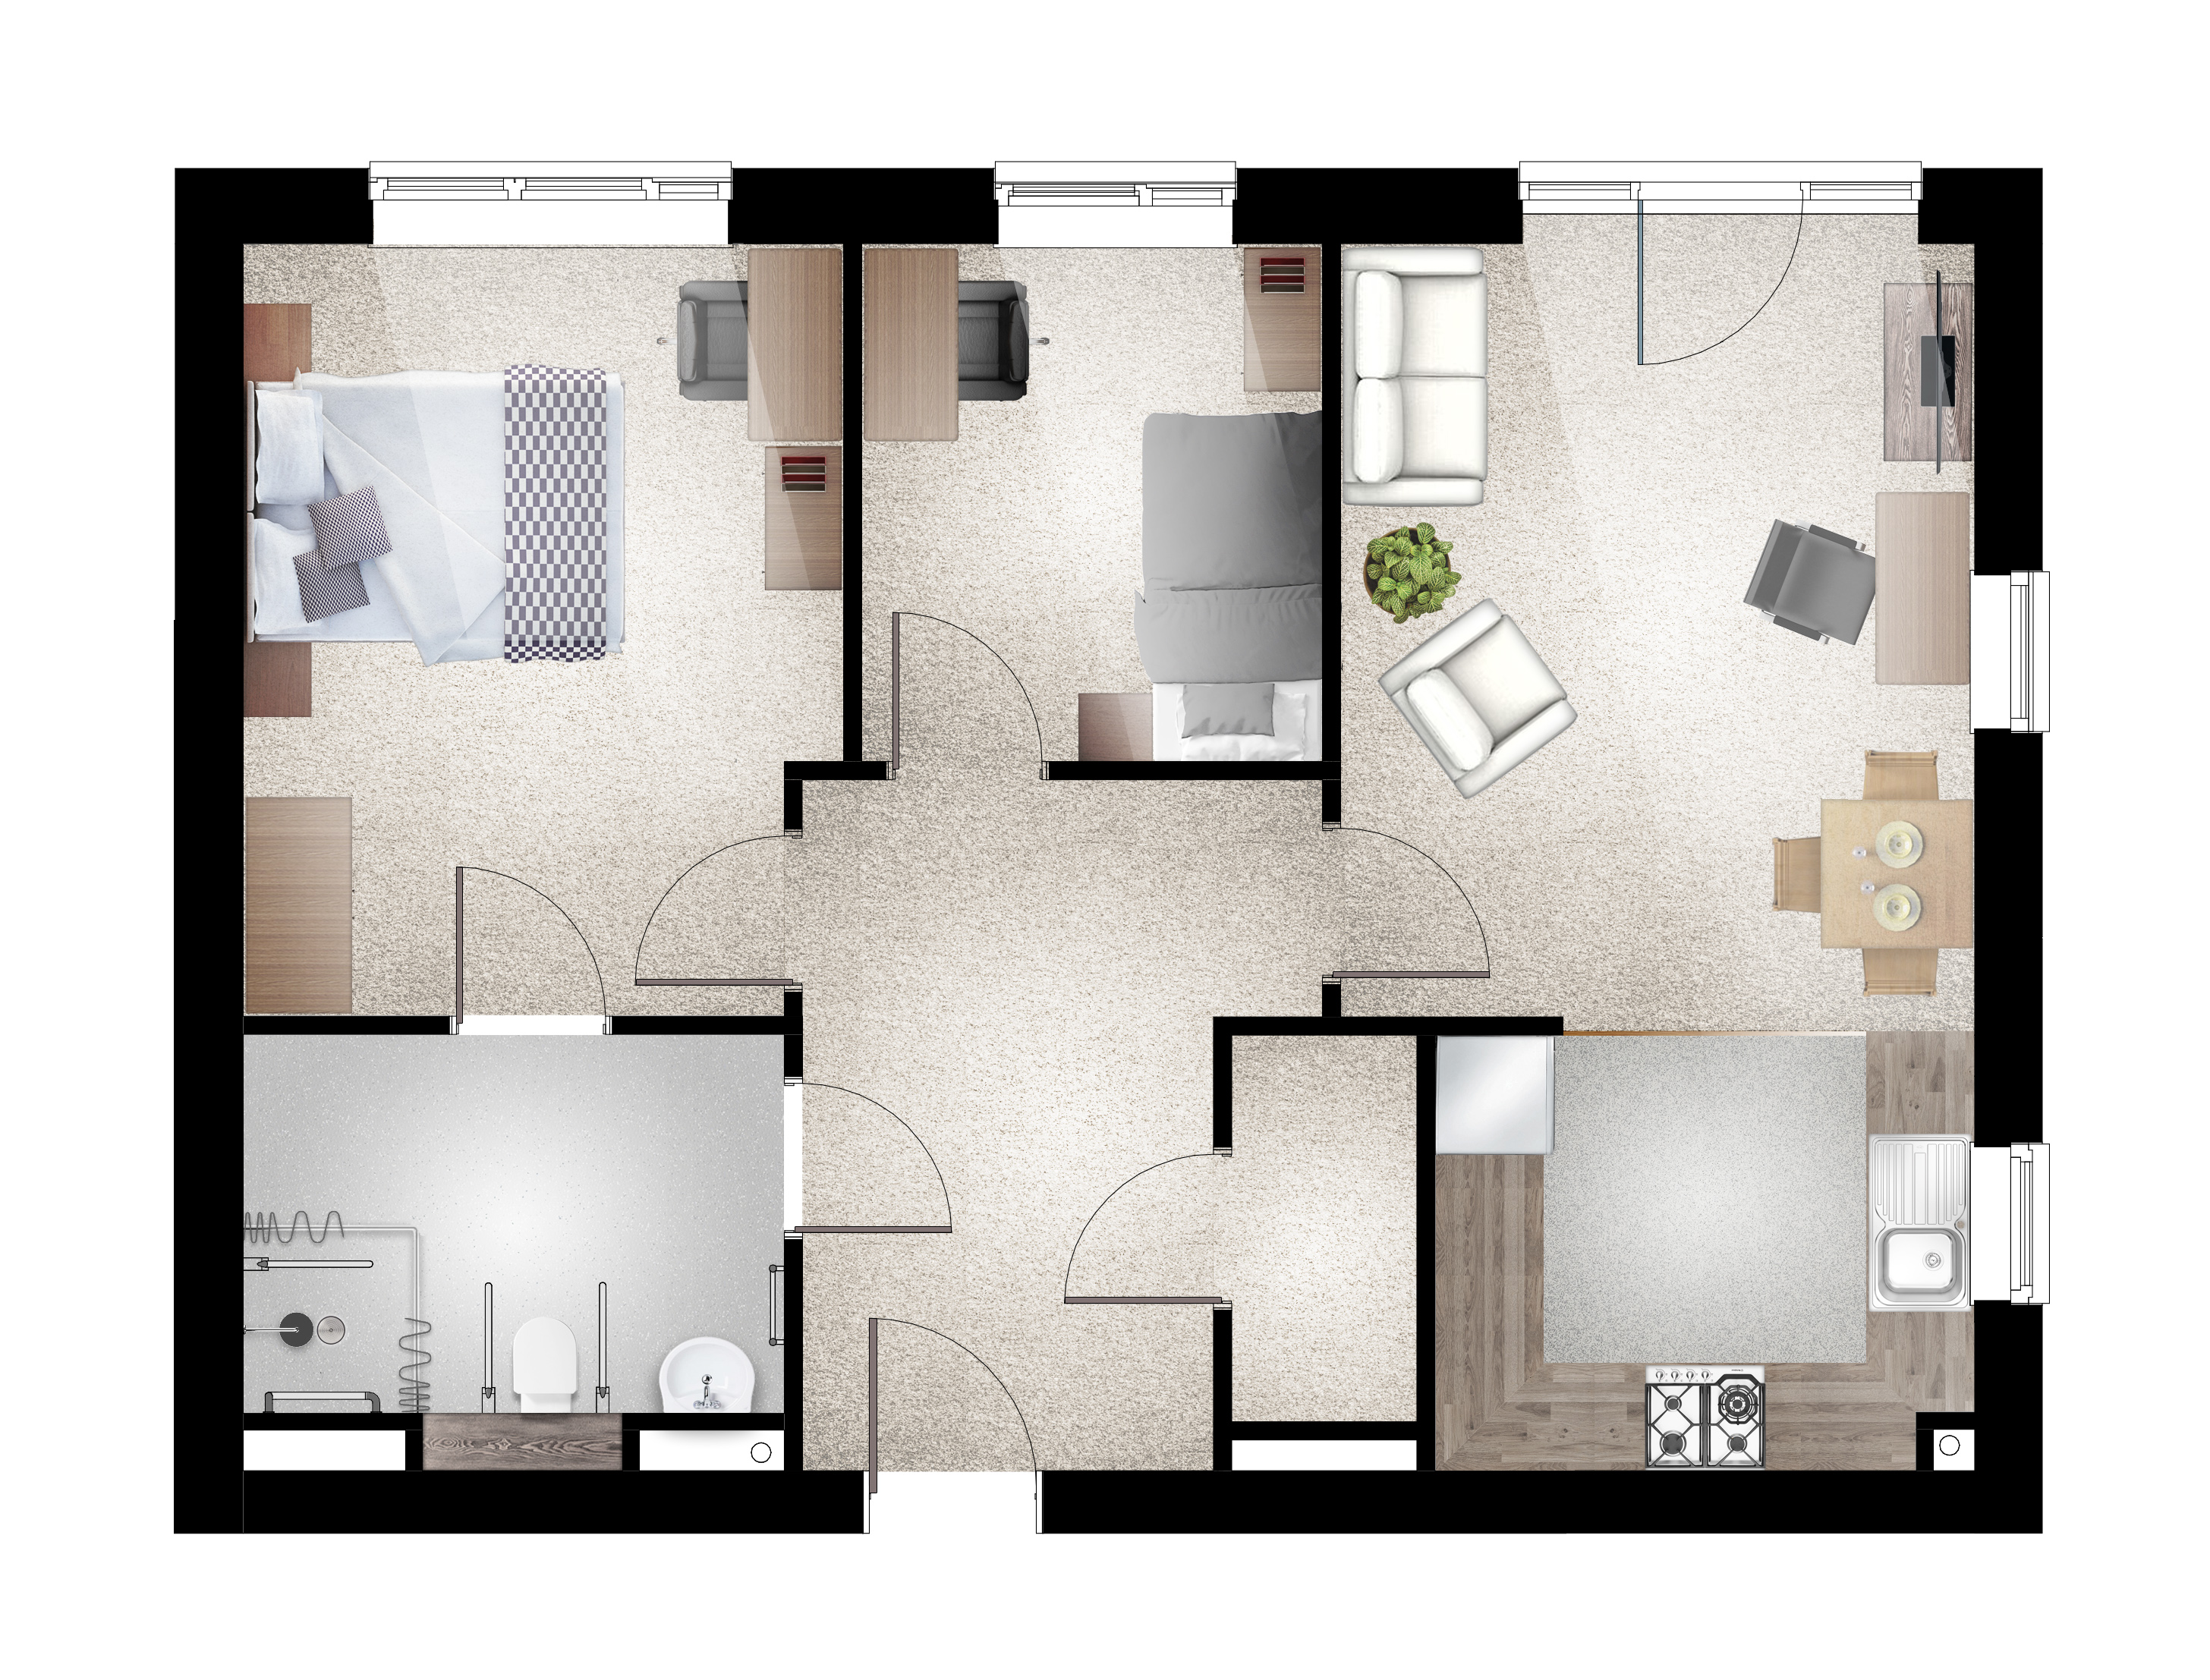 Floor plan of a two bedroom apartment at Willow Court